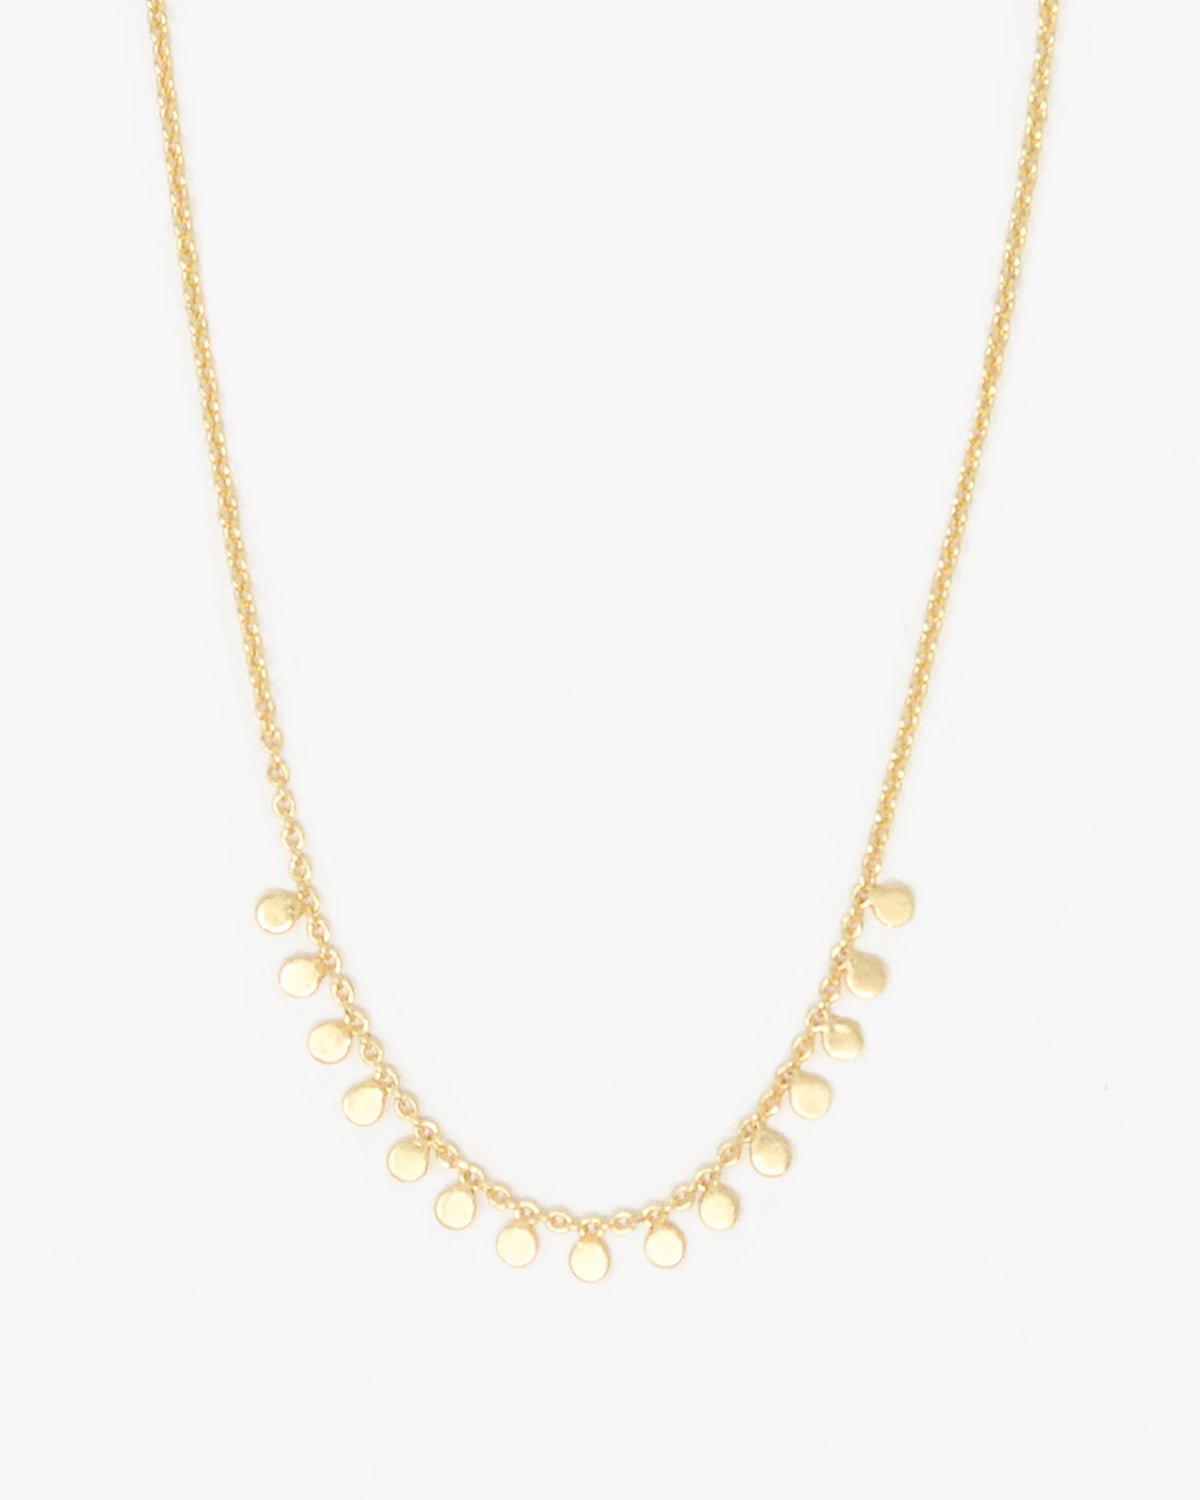 FAIRFAX 15 DISC SHAKER NECKLACE - Shop Cupcakes and Cashmere